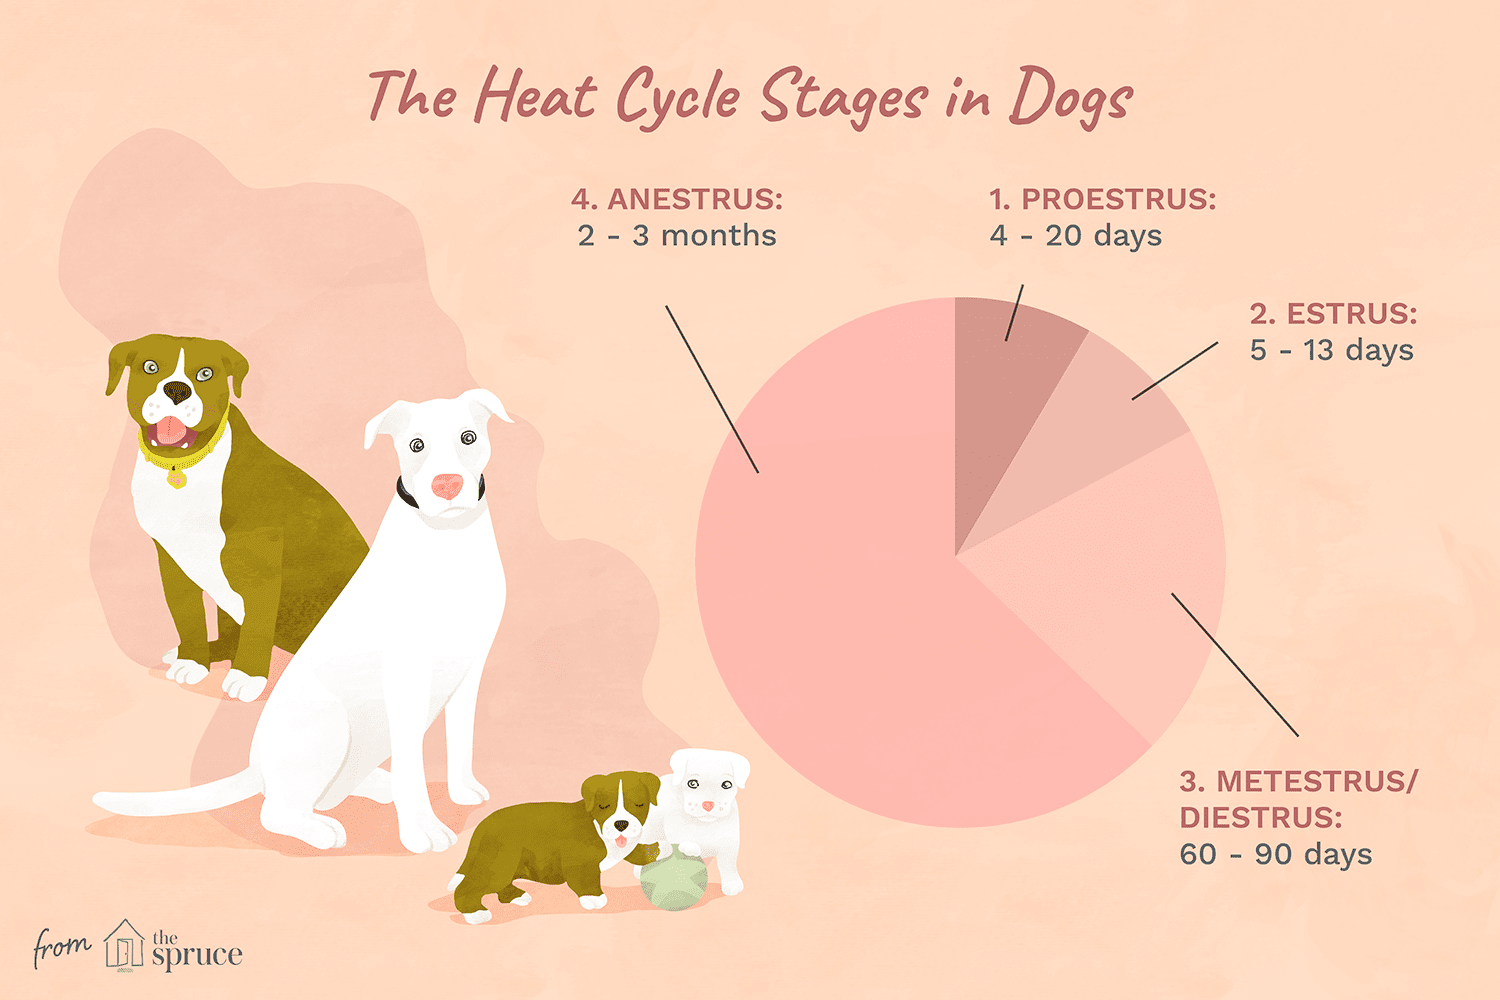 Illustration of the heat cycle stages in dogs including proestrus, estrus, metestrus, and anestrus.